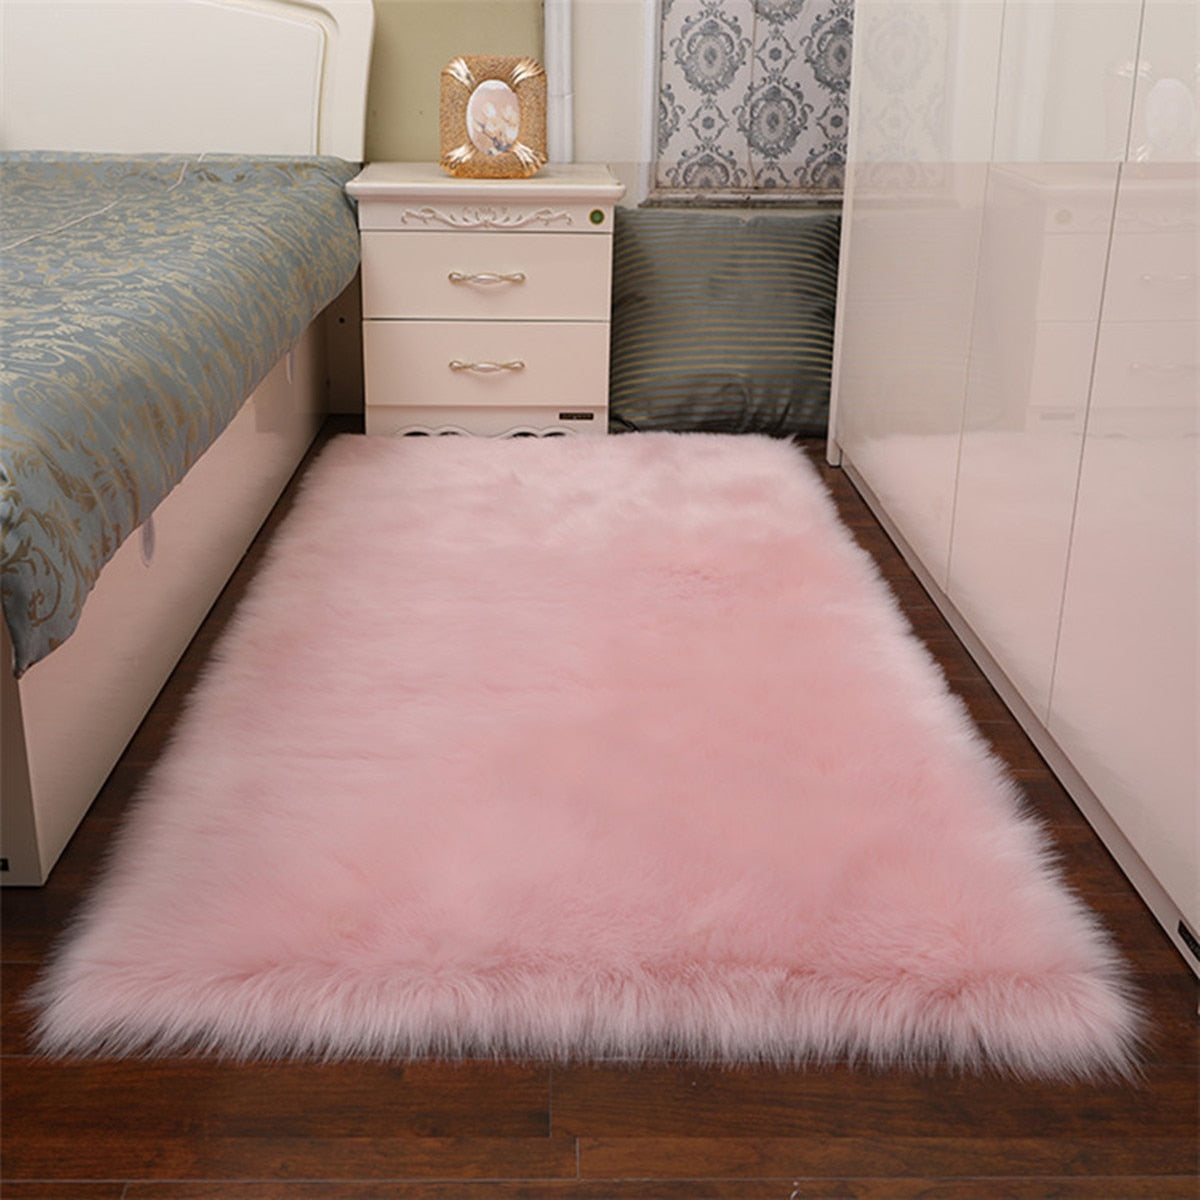 150x60cm Faux Soft Artificial Wool Fur Area Rugs Wool Shaggy Carpet Floor Mat Plush Sofa Cover Seat Pad for Living Room Bedroom